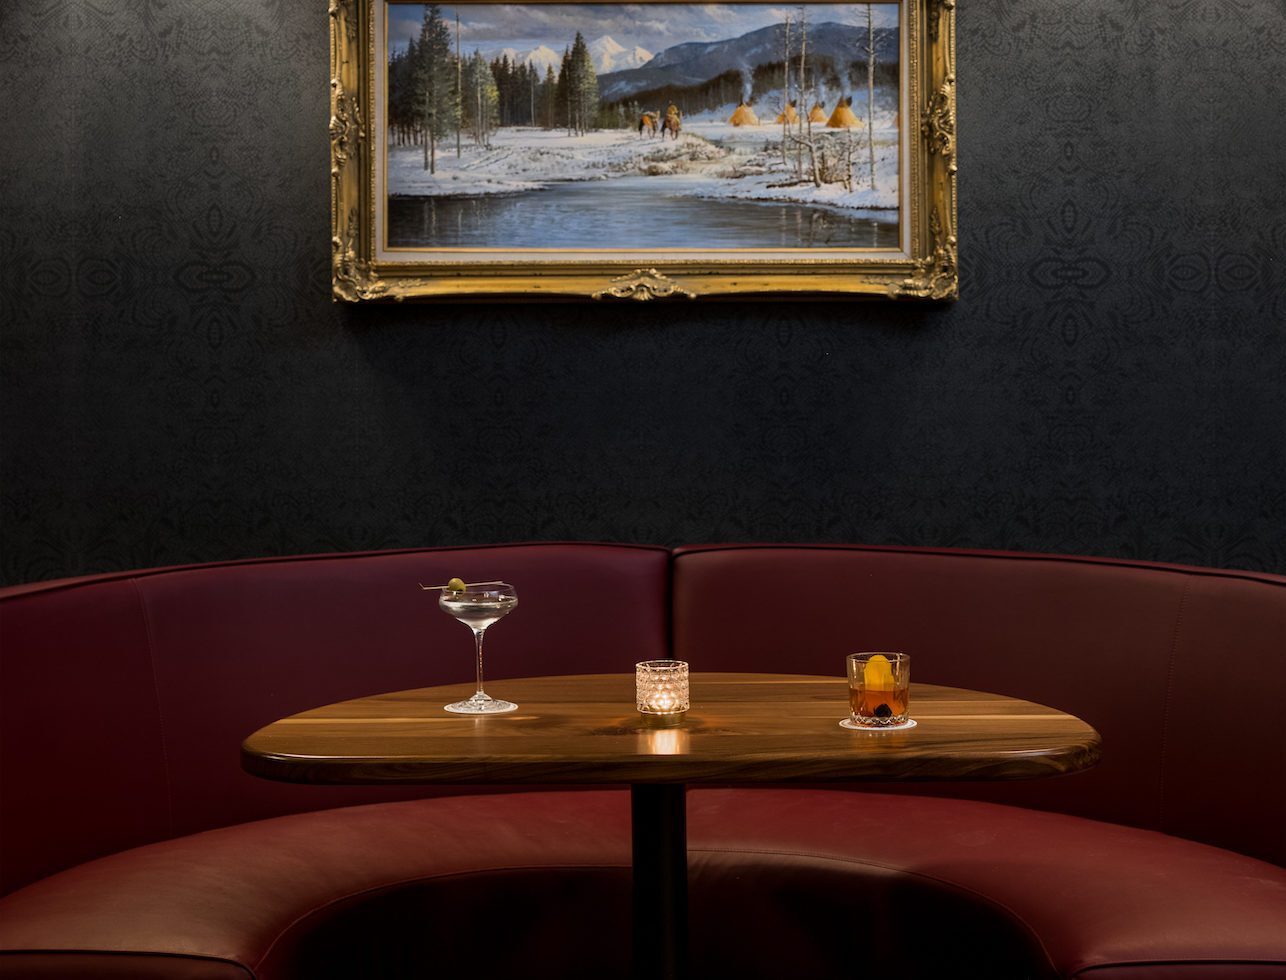 Table displays two types of drinks in distinct glasses, accompanied by a candle and landscape portrait.